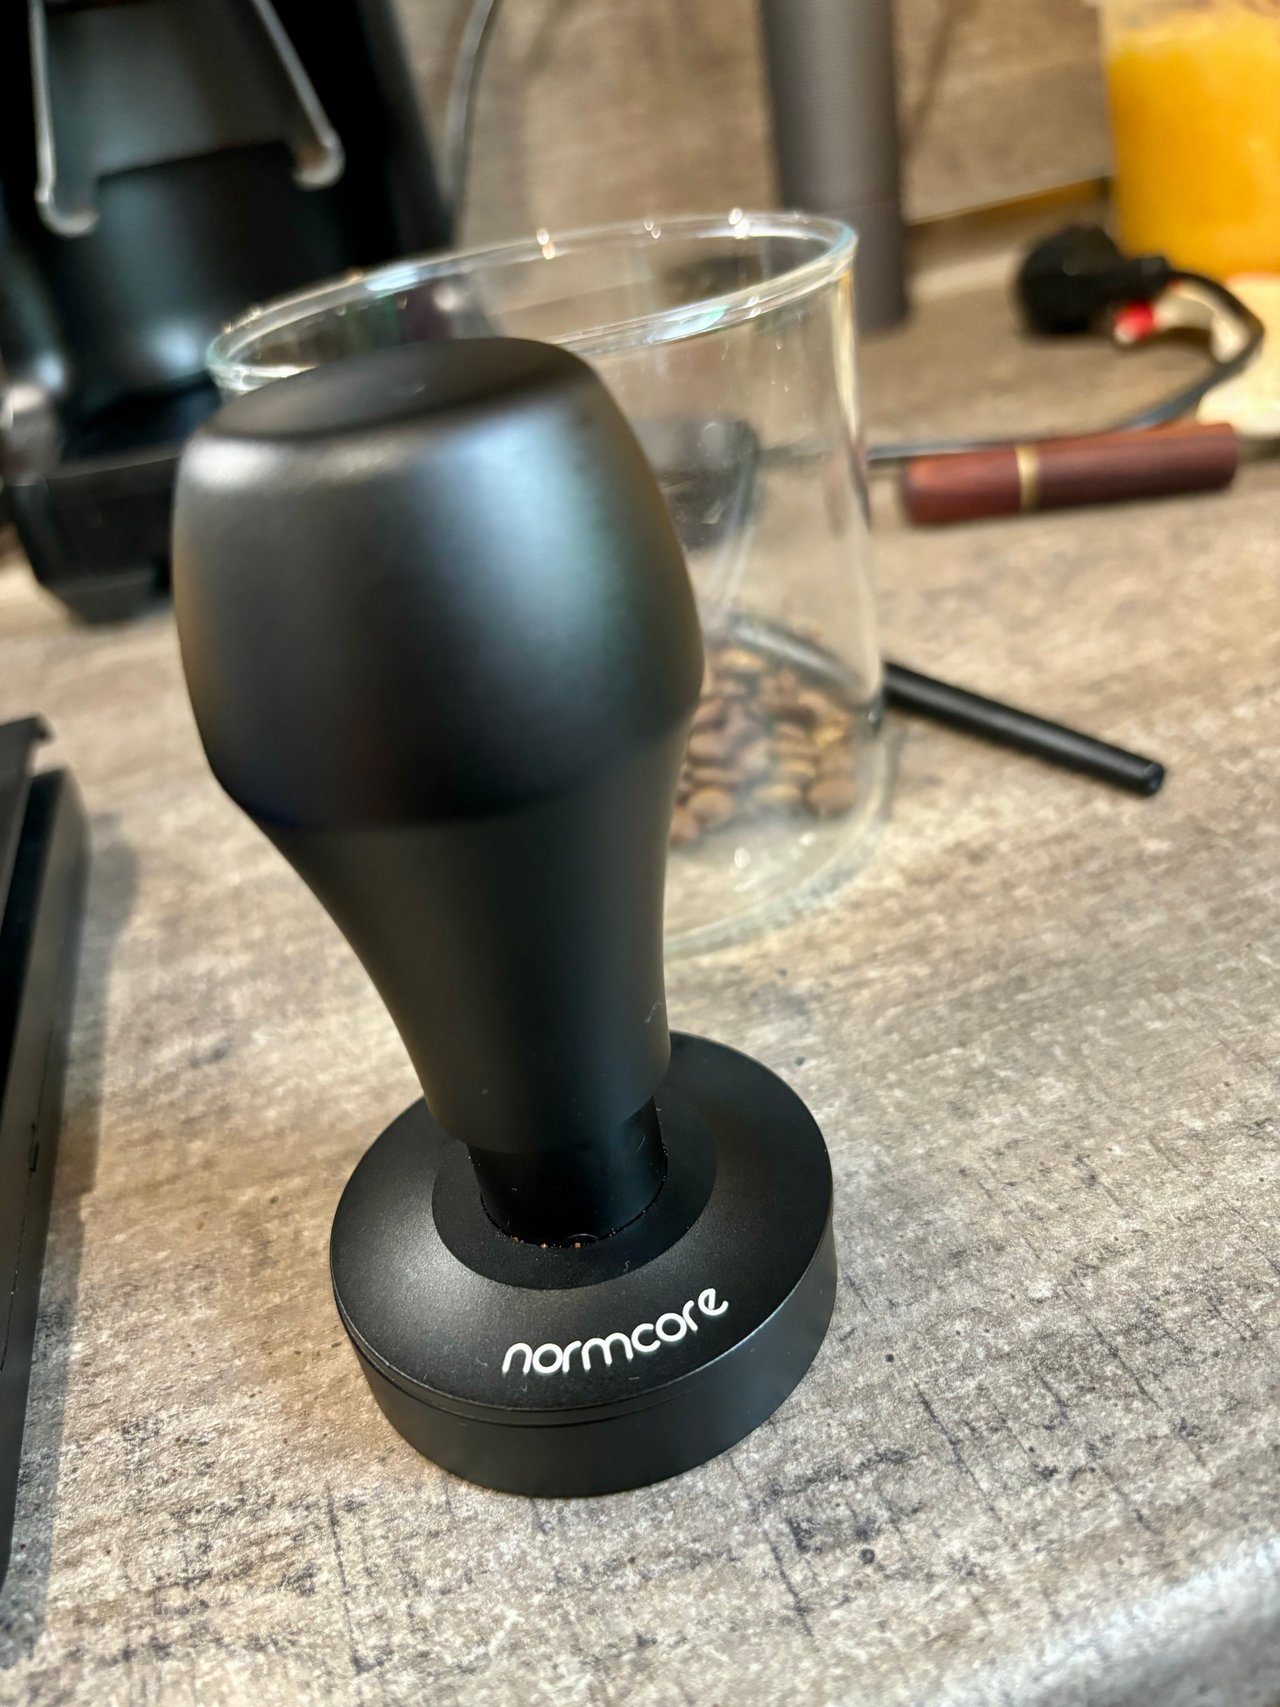 Enjoying my new espresso brewing gear with every sip of coffee. Normcore Tamper and dosing funnel.